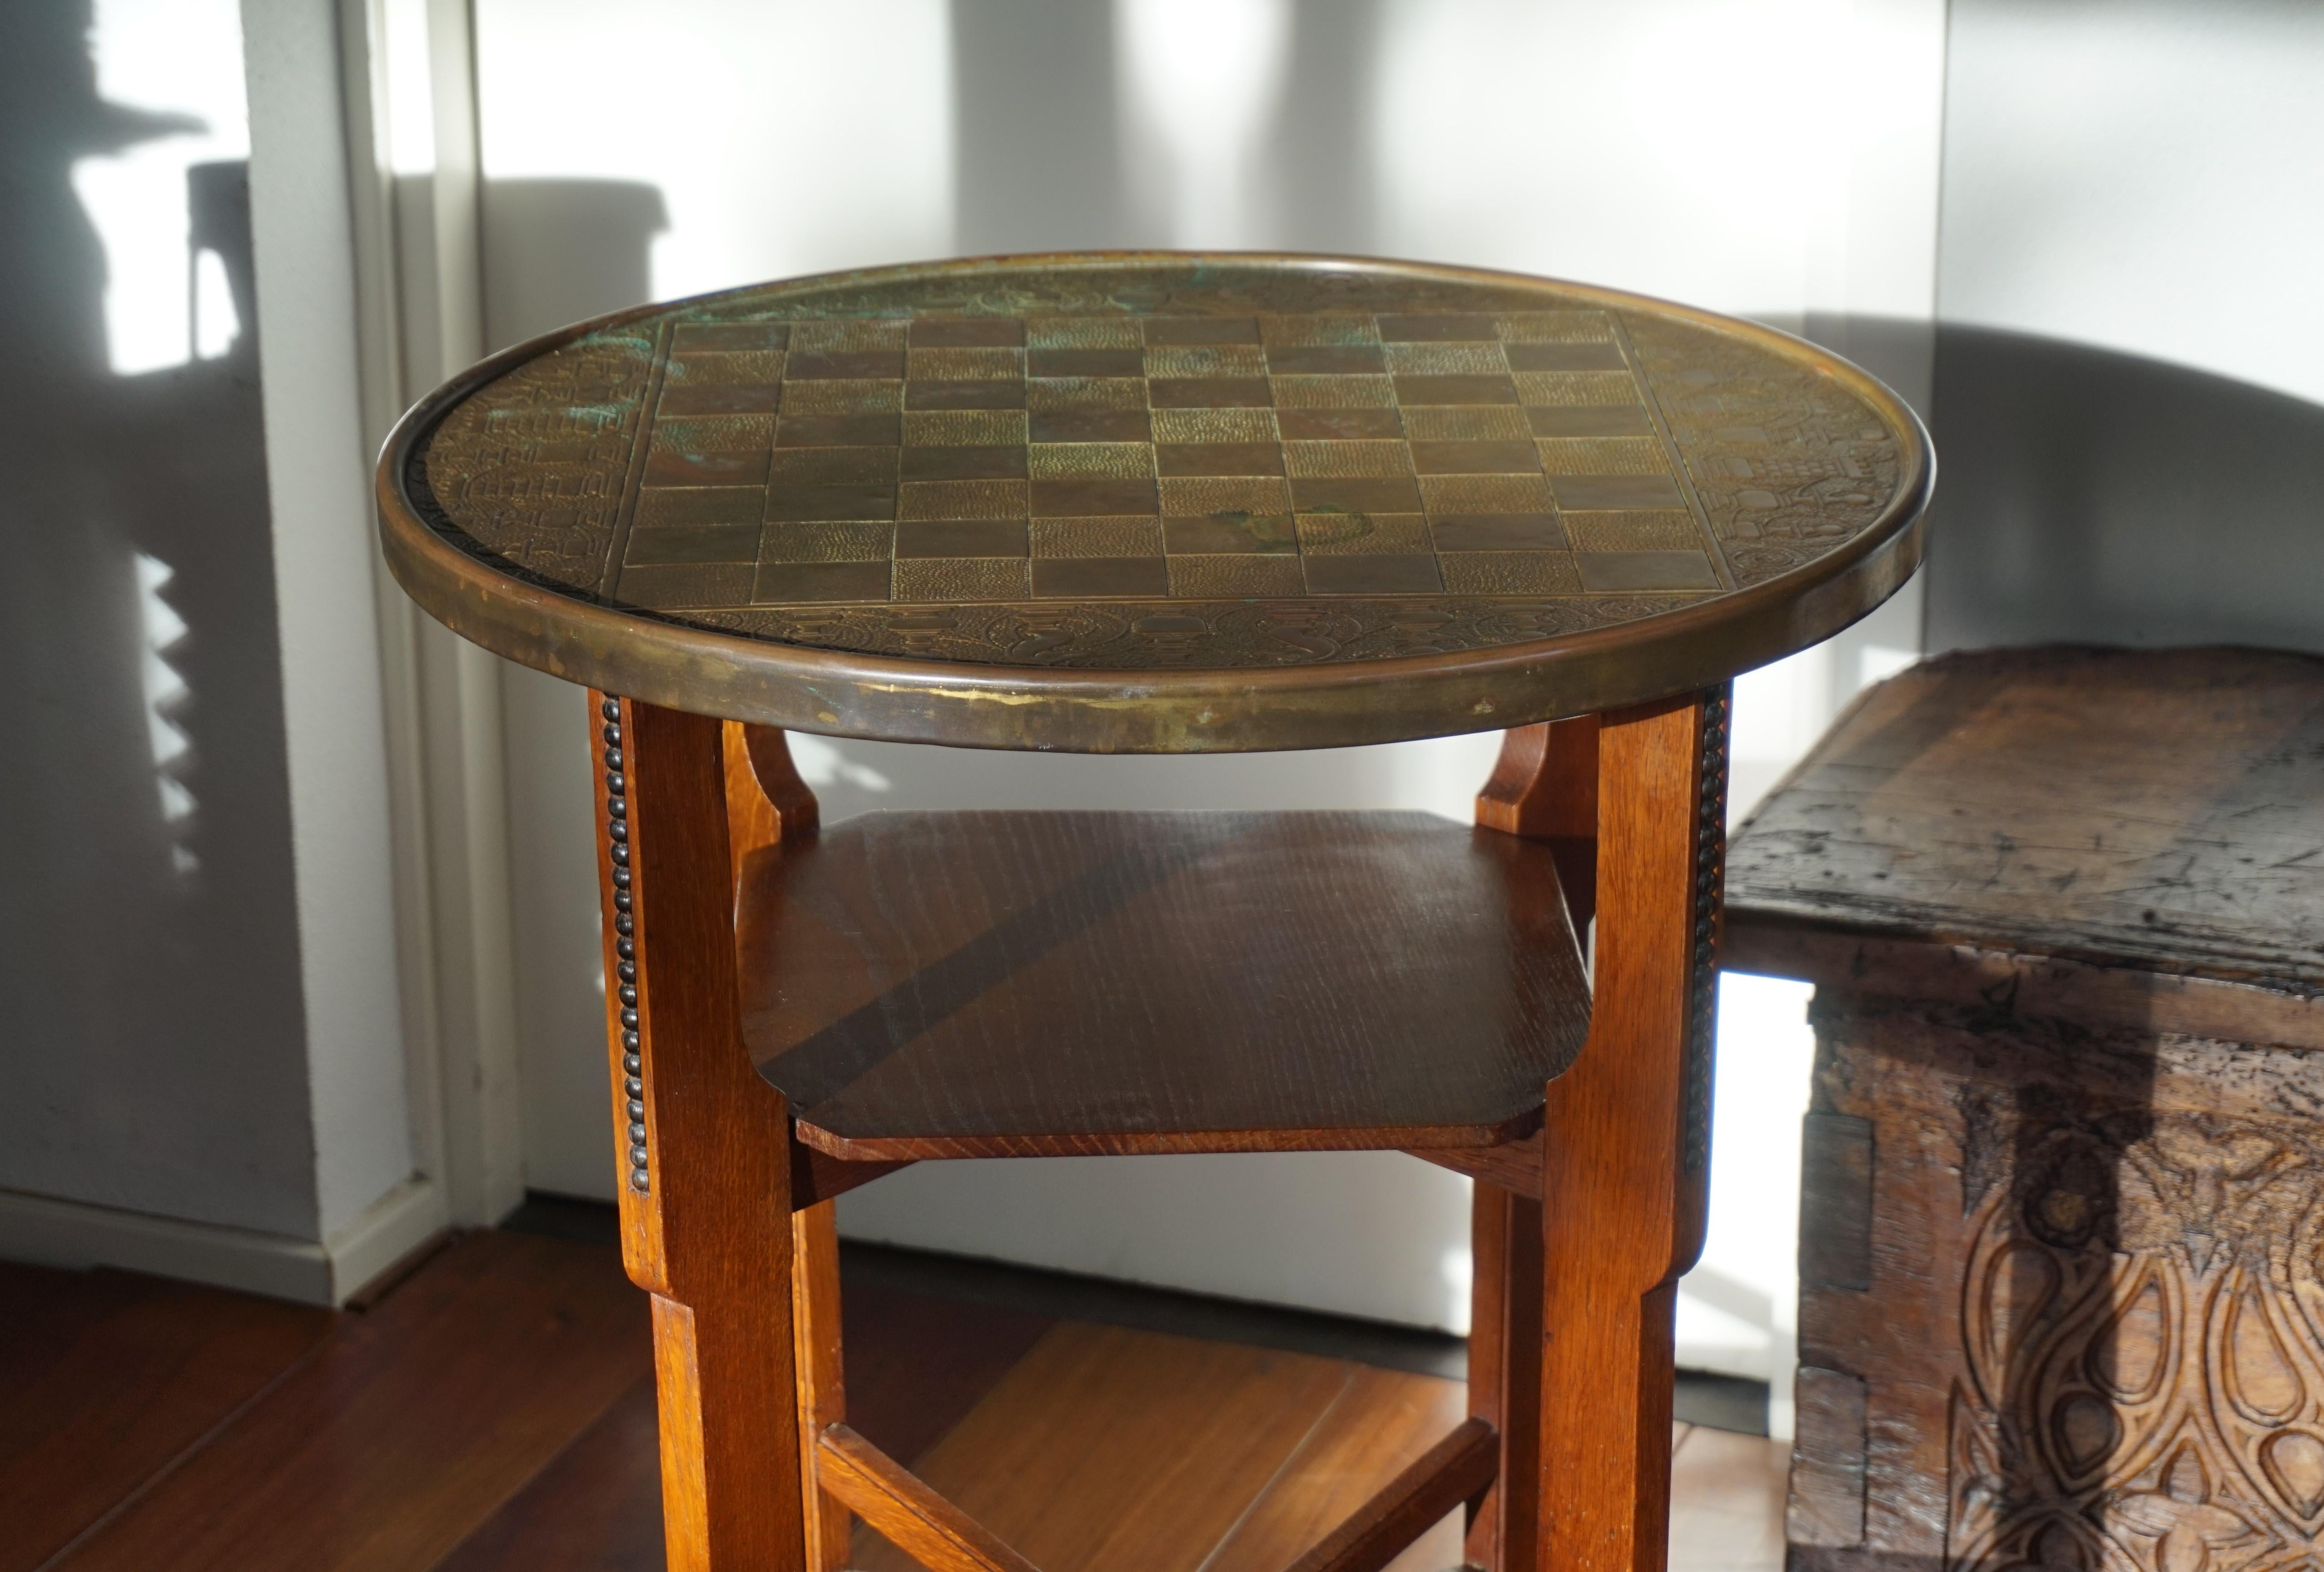 Early 1900s Dutch Arts and Crafts Chess Table with Embossed Brass Chess Pieces 3